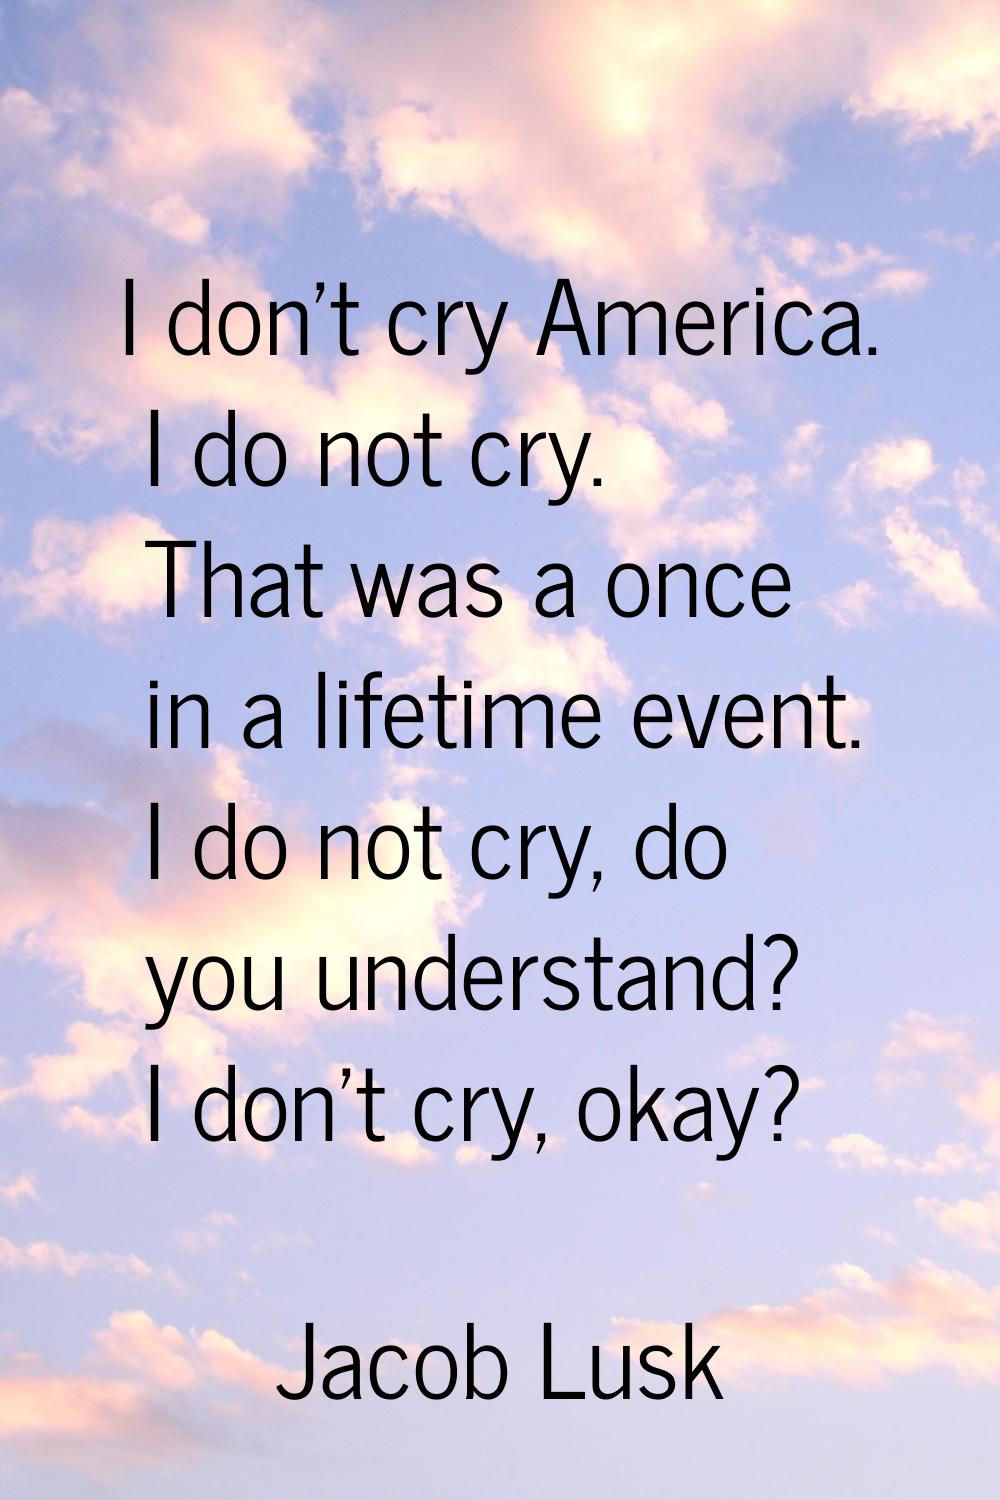 I don't cry America. I do not cry. That was a once in a lifetime event. I do not cry, do you unders